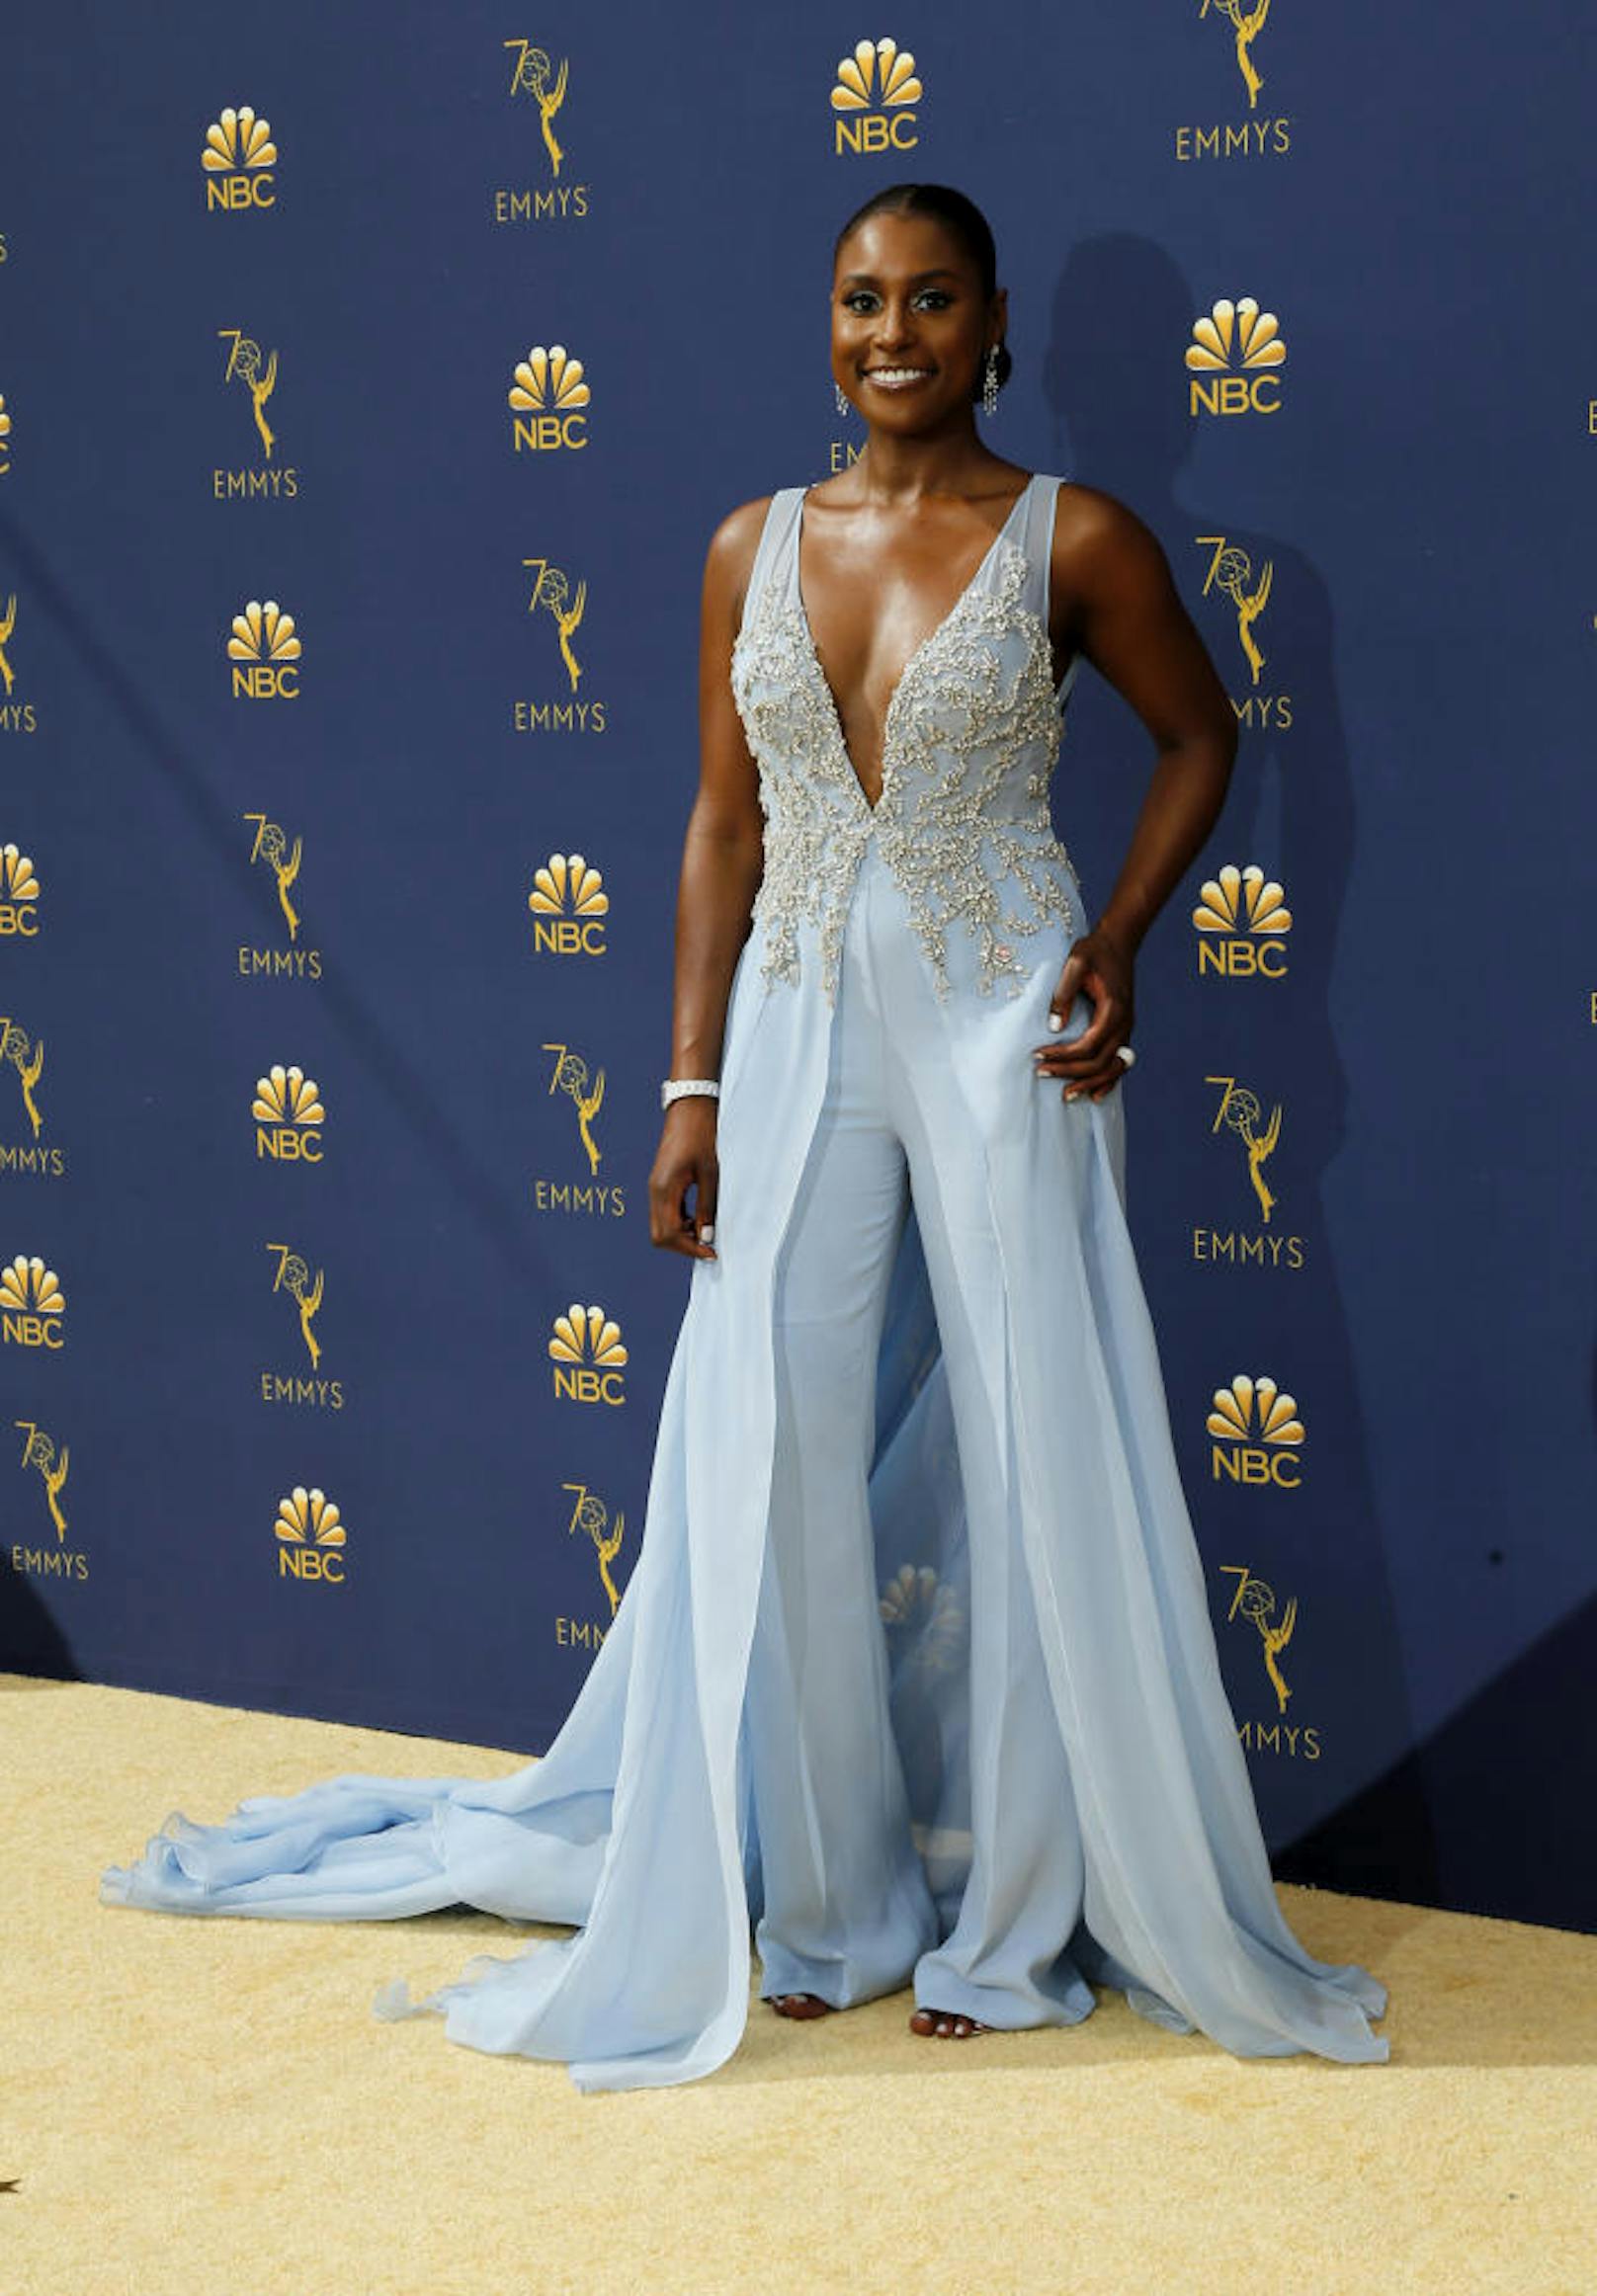 70th Primetime Emmy Awards - Arrivals - Los Angeles, California, U.S., 17/09/2018 - Issa Rae. REUTERS/Kyle Grillot - HP1EE9I00THCW